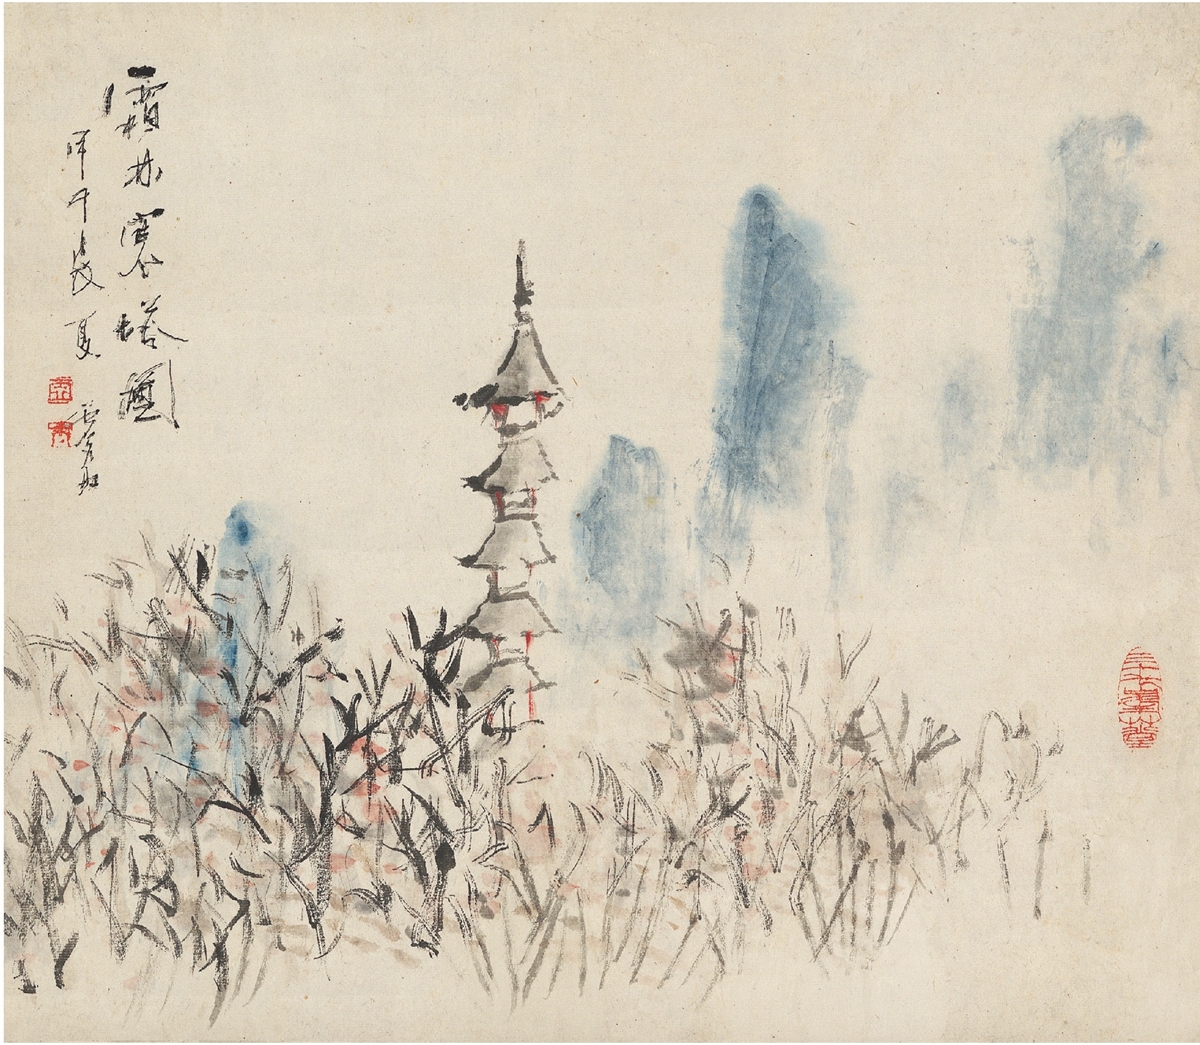 PAGODA IN THE FROST FOREST by Xu Gu, 1894